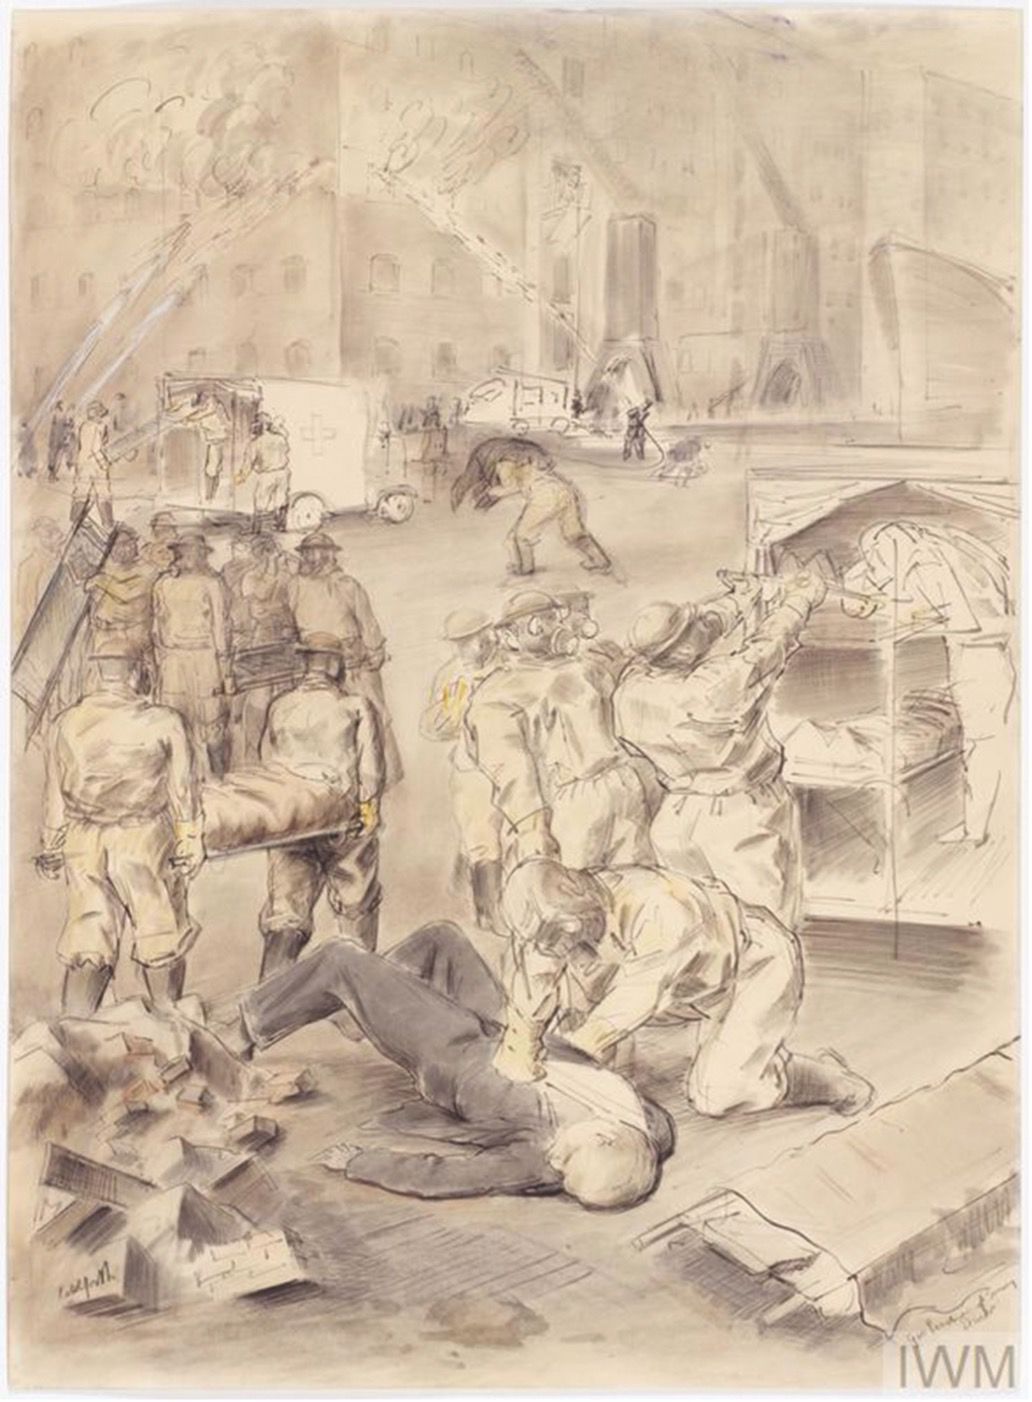 Street scene of buildings on fire with soldiers in gas masks tending to the injured